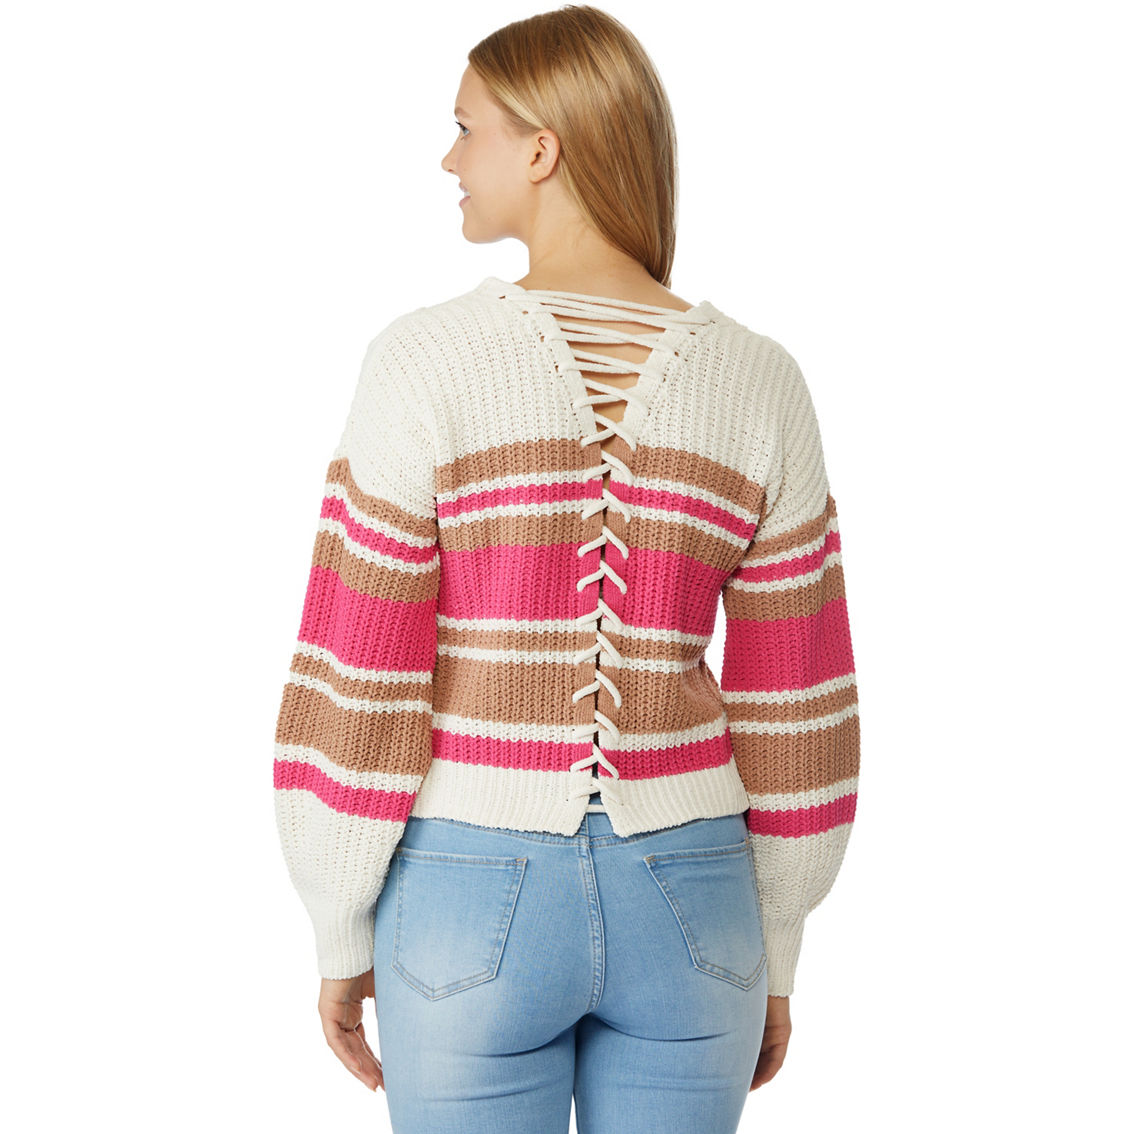 Derek Heart Juniors Mixed Cable Lace Up Back Pullover - Image 2 of 3